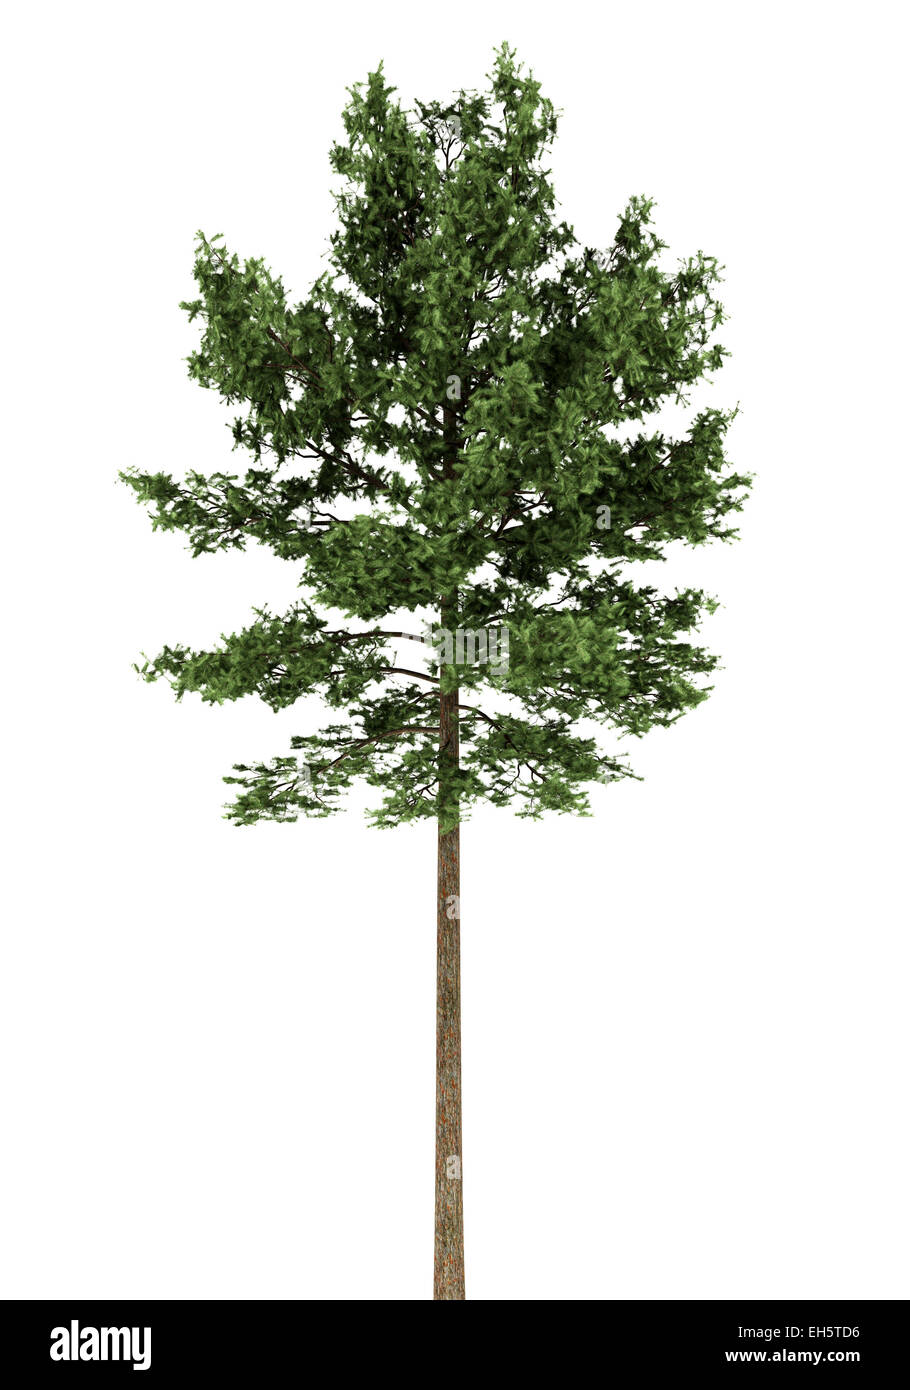 scots pine tree isolated on white background Stock Photo